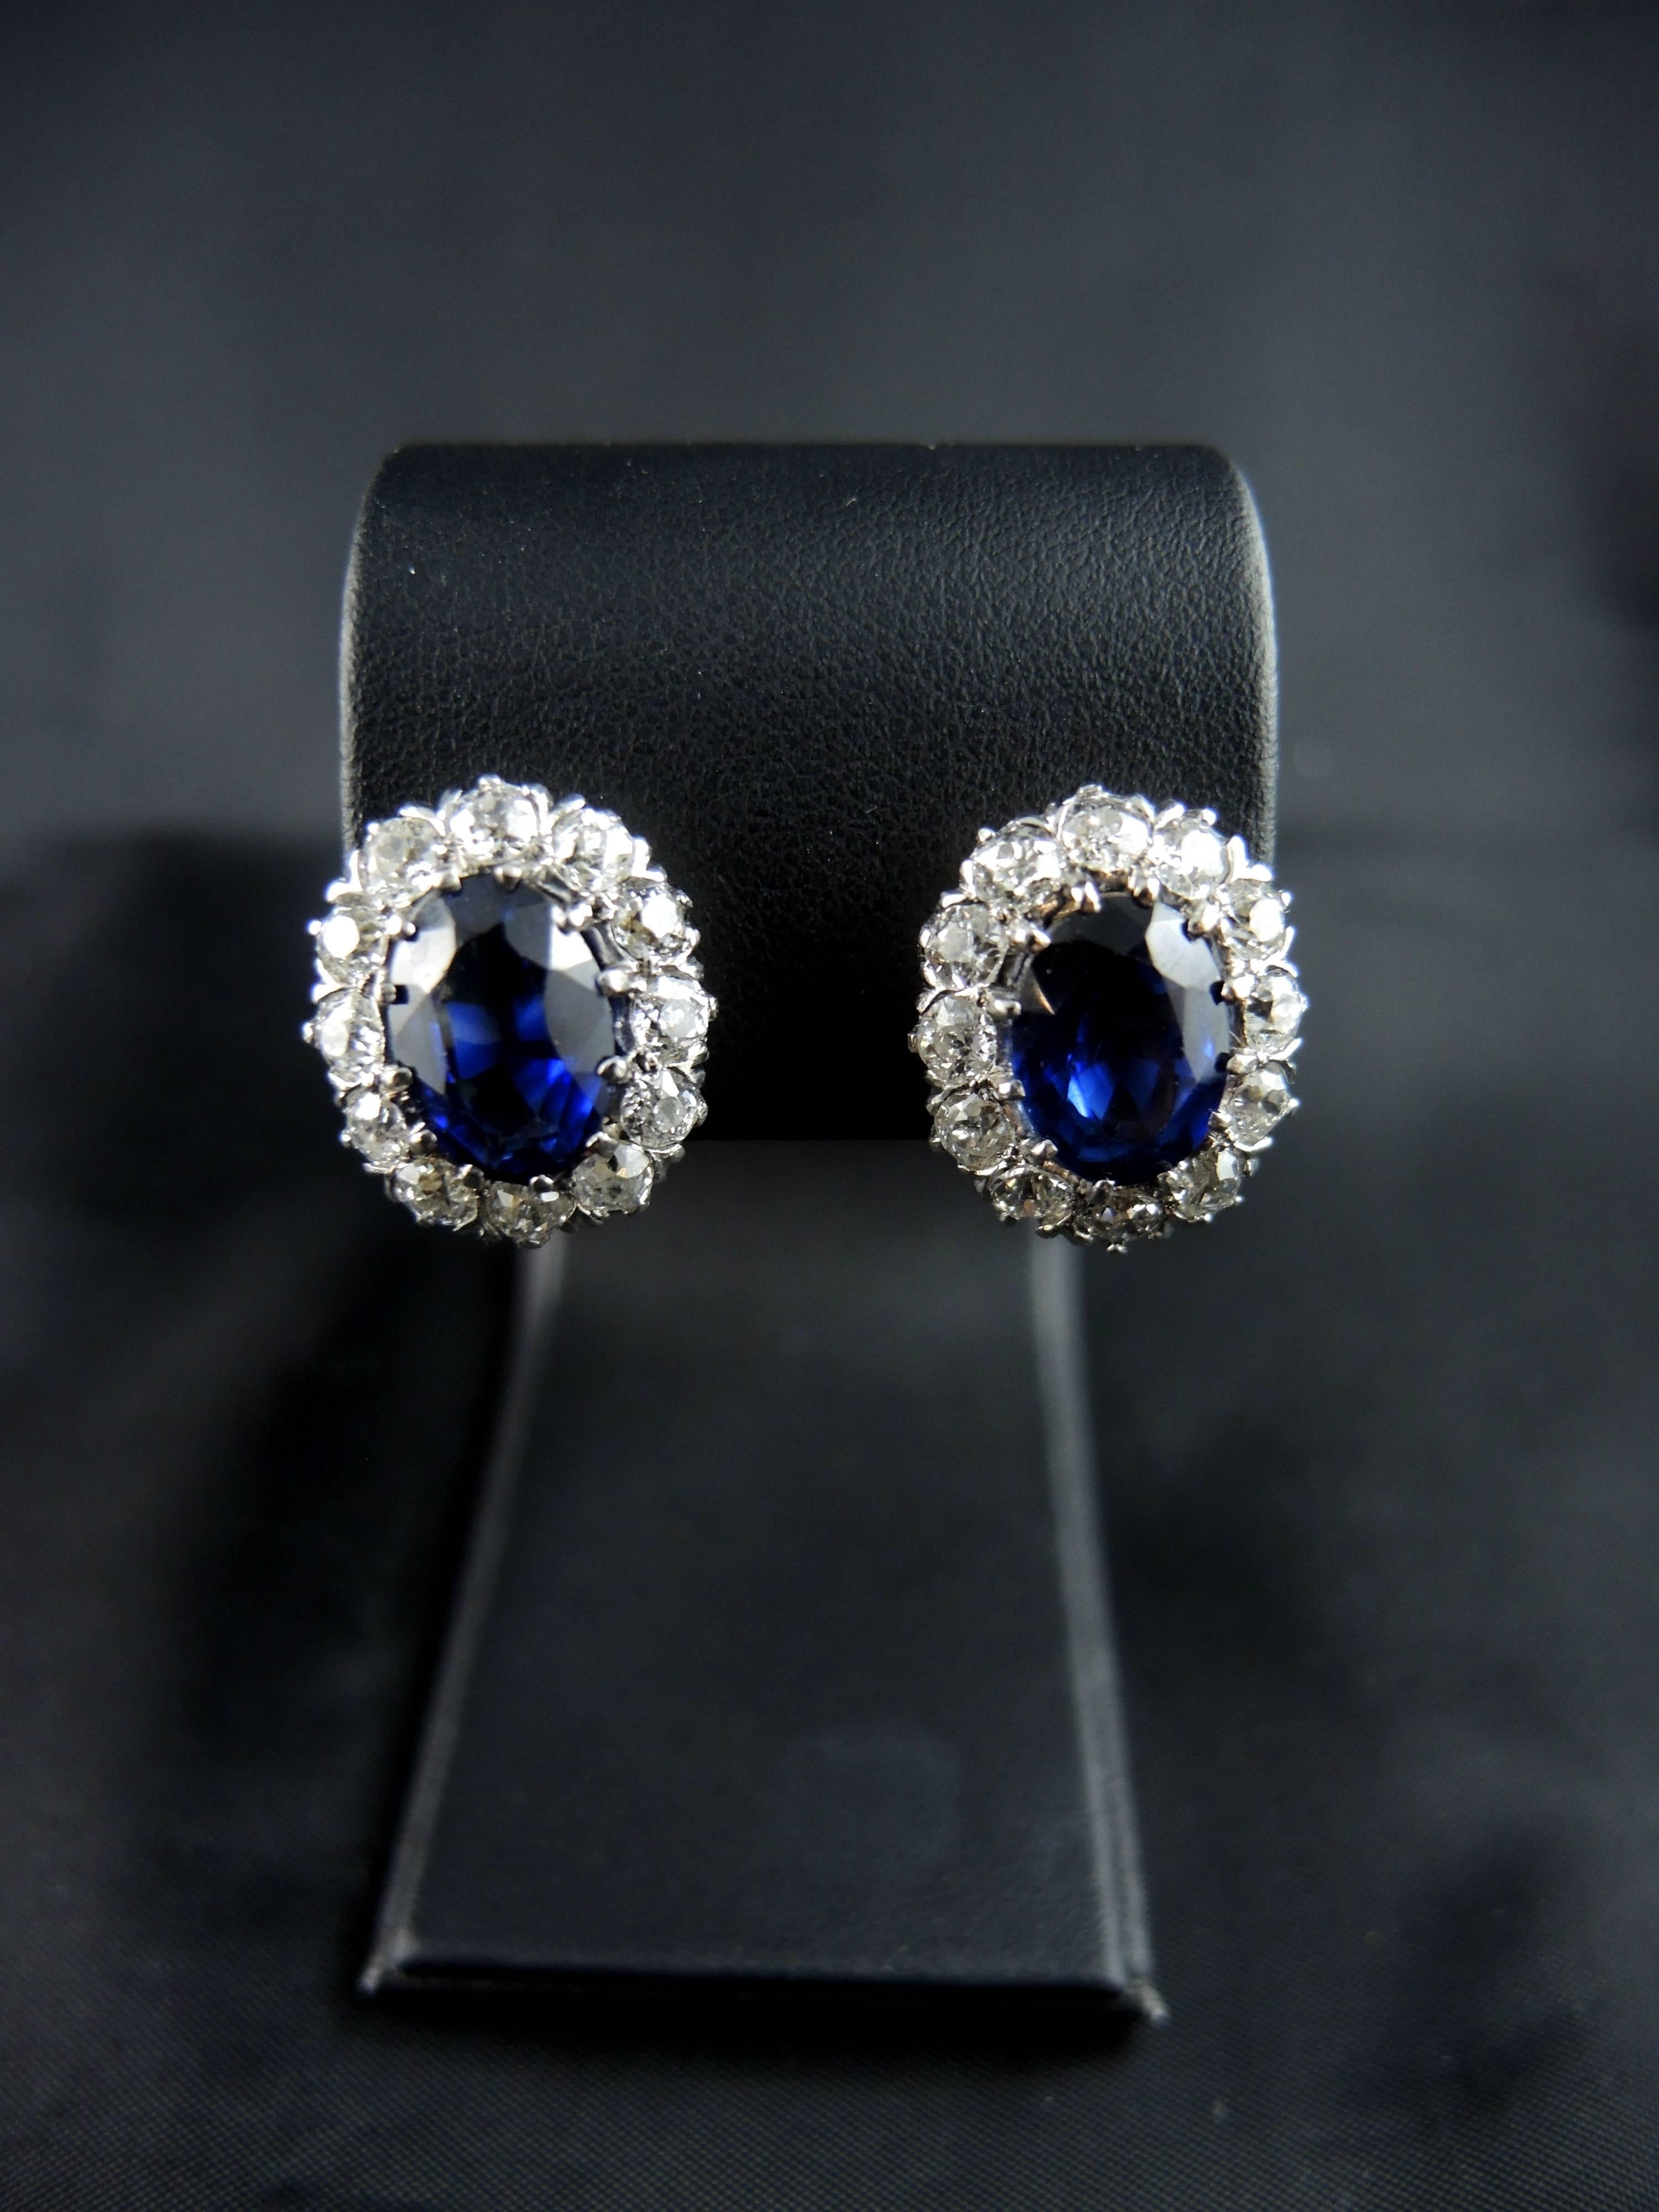 Superb cluster earrings set in platinium and yellow gold (quality mark: owl and Masacron) with prong set old cut diamonds, and royal blue sapphire, probably synthetic.
Total weighting of the diamonds: apx 4.50 CTS.